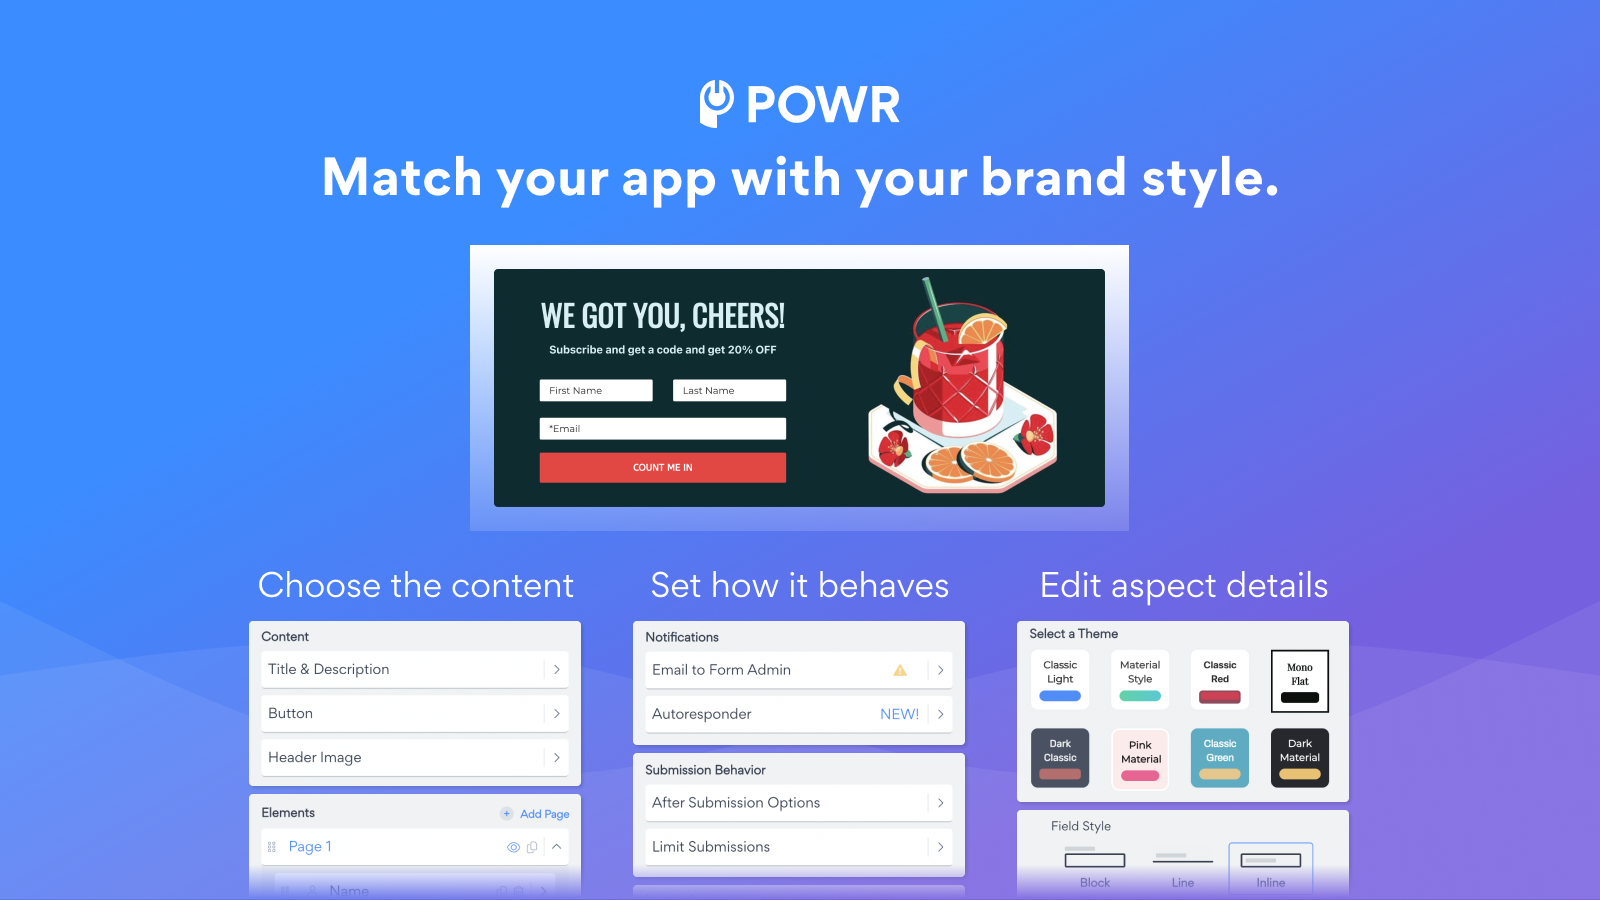 Match your app with your brand style